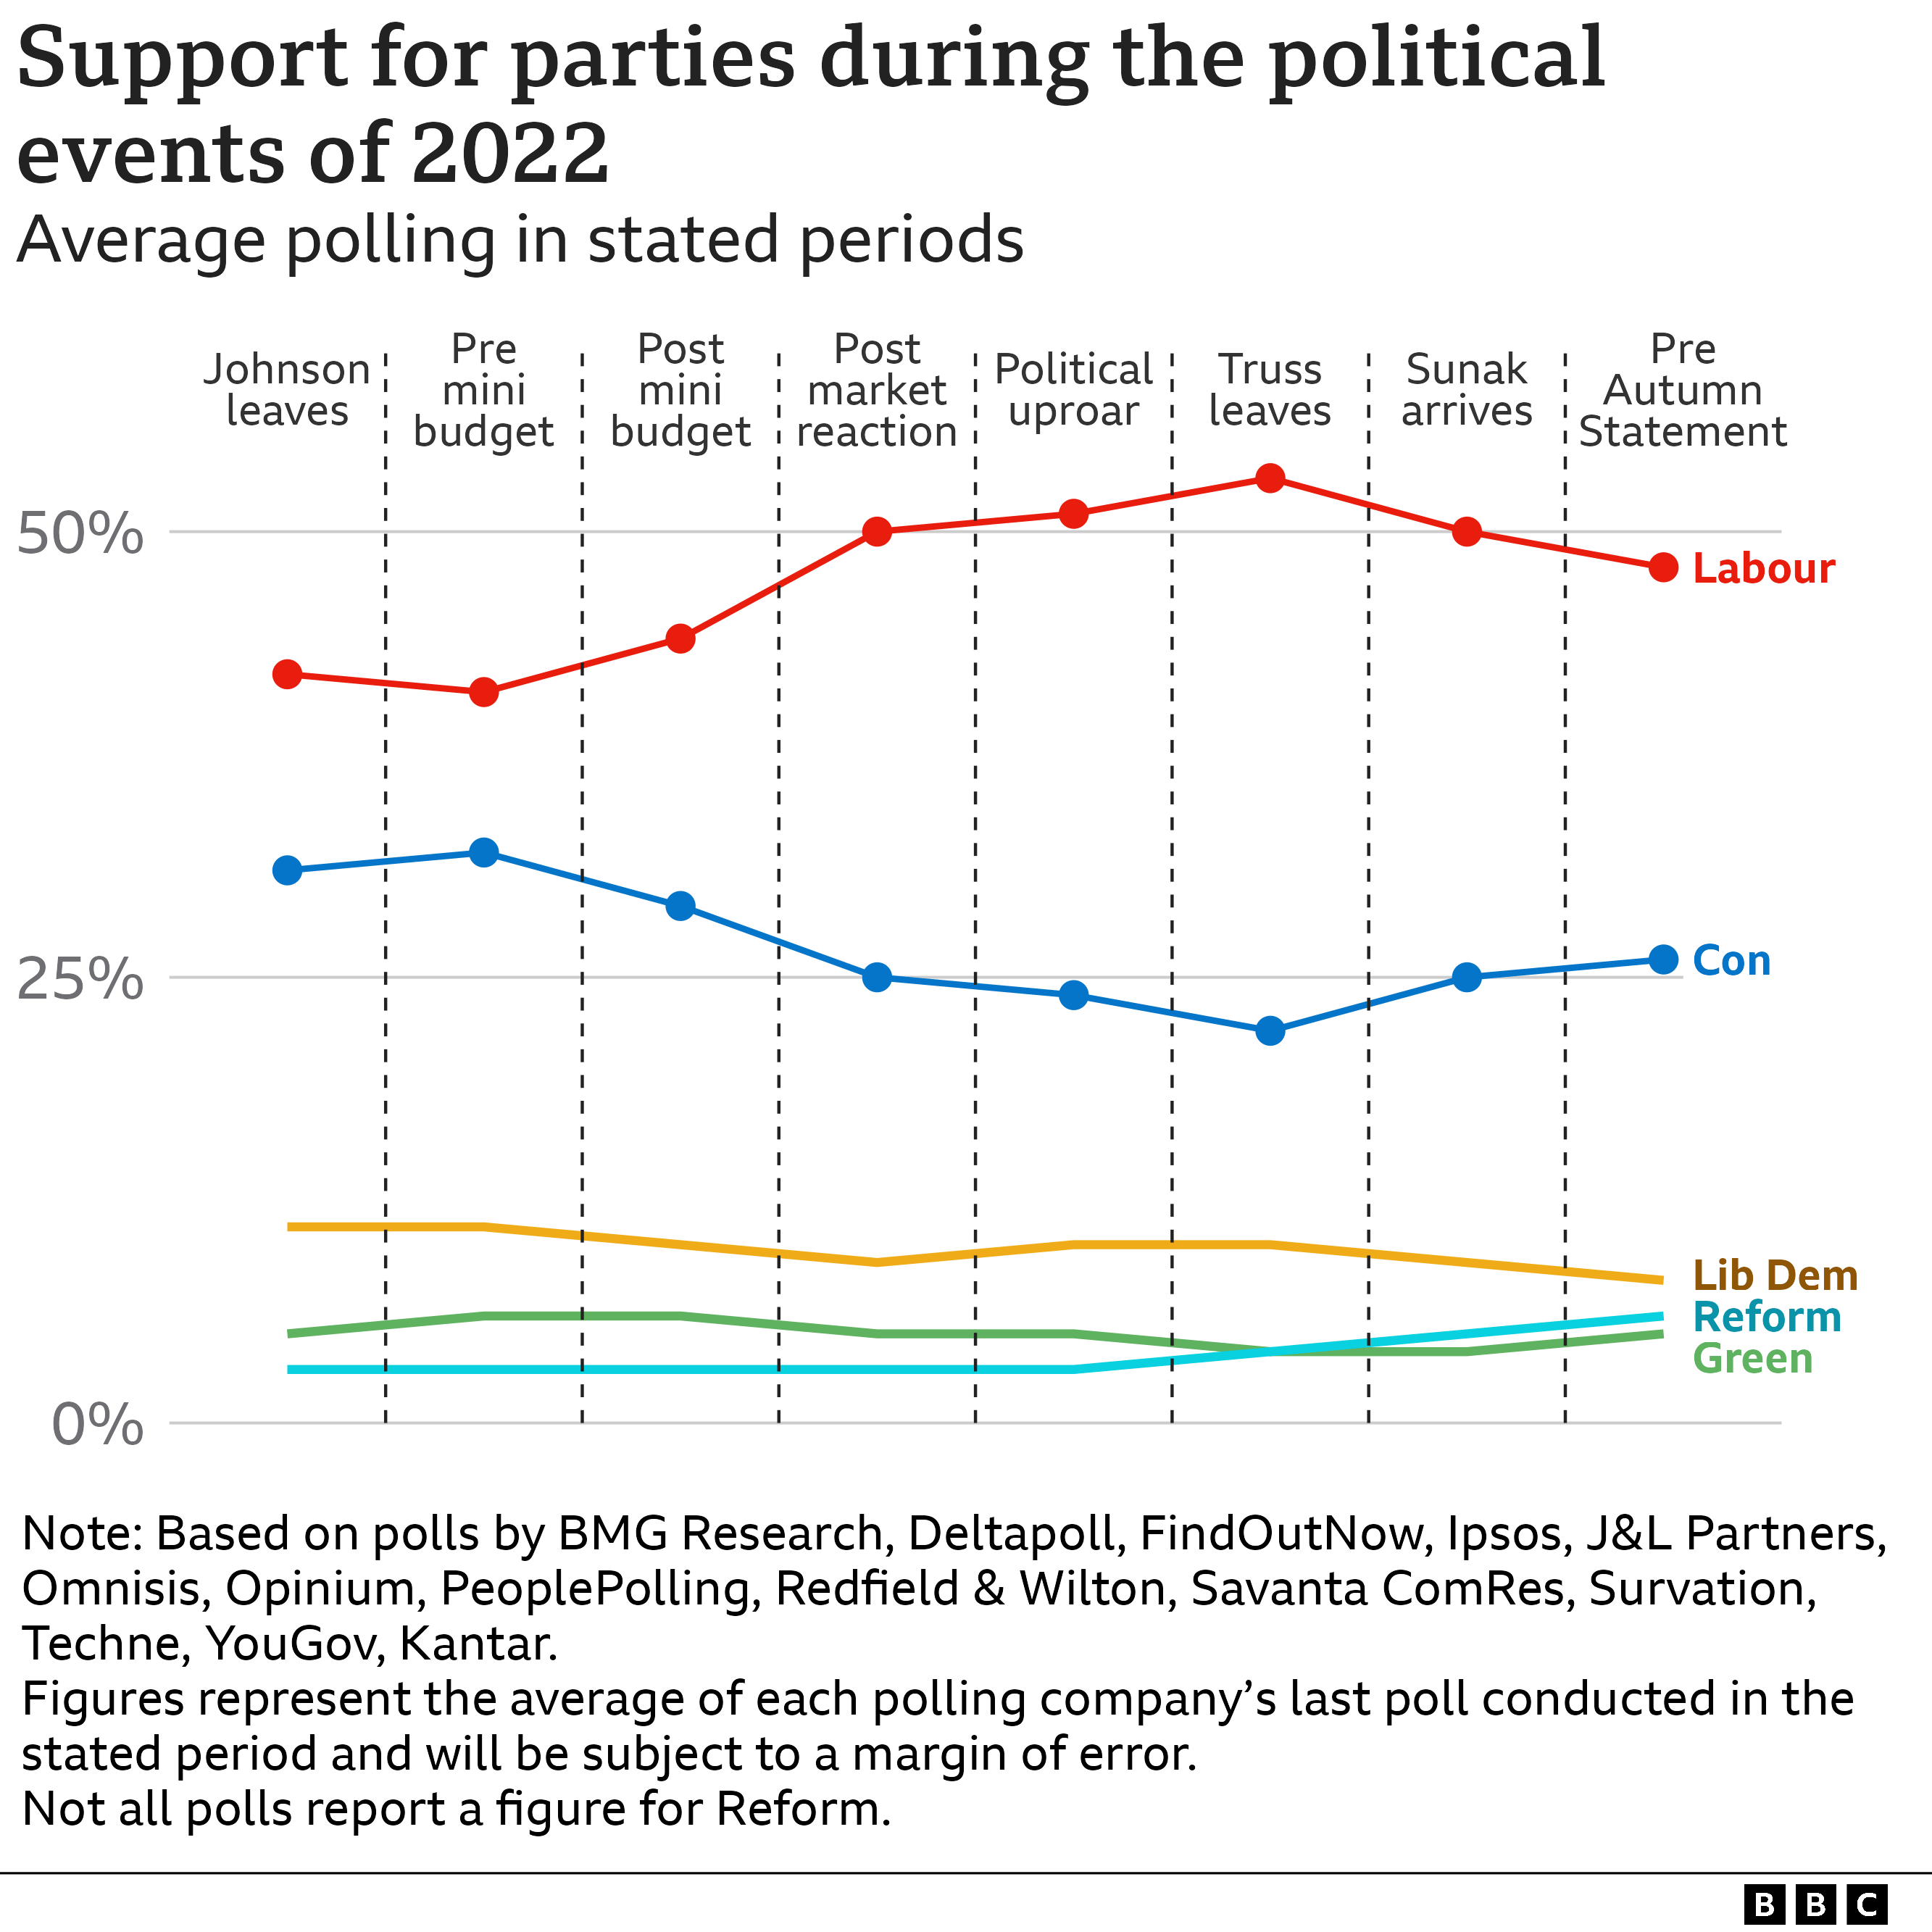 Chart of polling averages in Autumn 2022